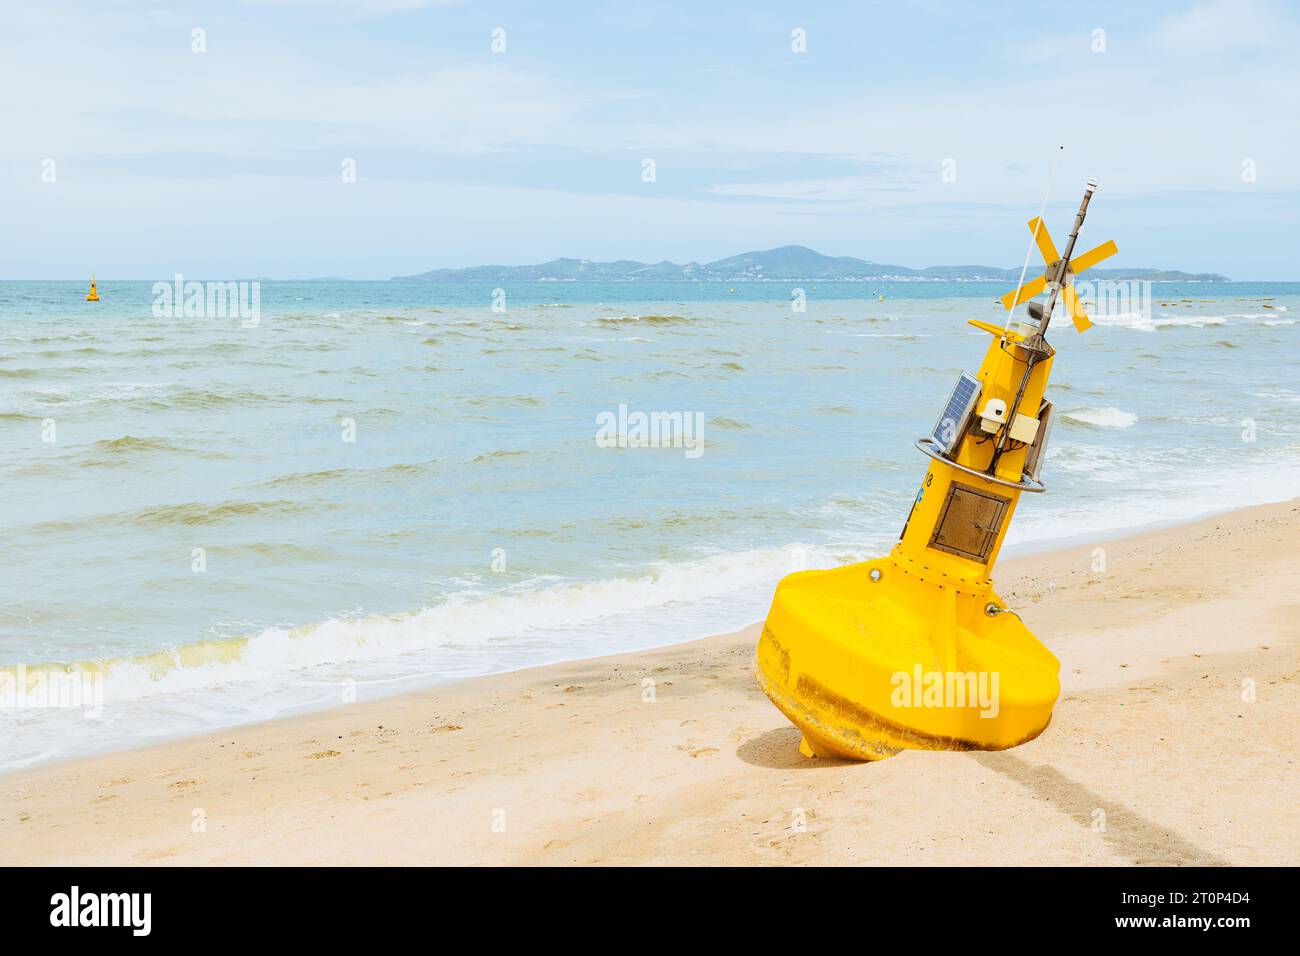 Ocean buoy environment sensor with CCTV camera out of service rest at sand beach waiting for repair maintenance Stock Photo